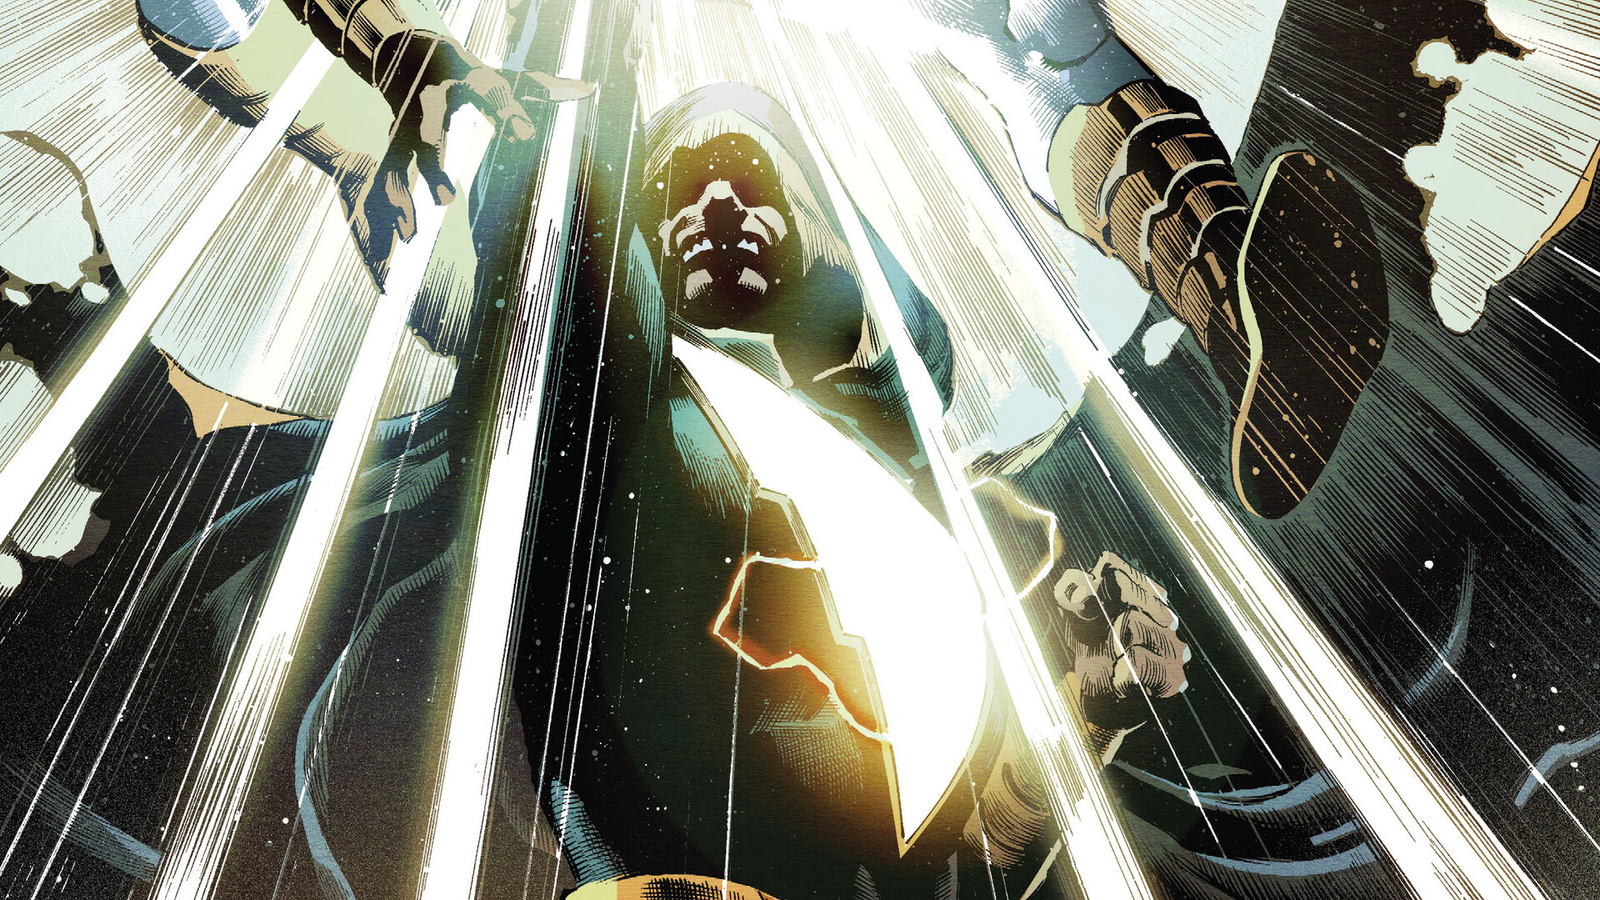 A New Black Adam Series from Christopher Priest and Rafa Sandoval